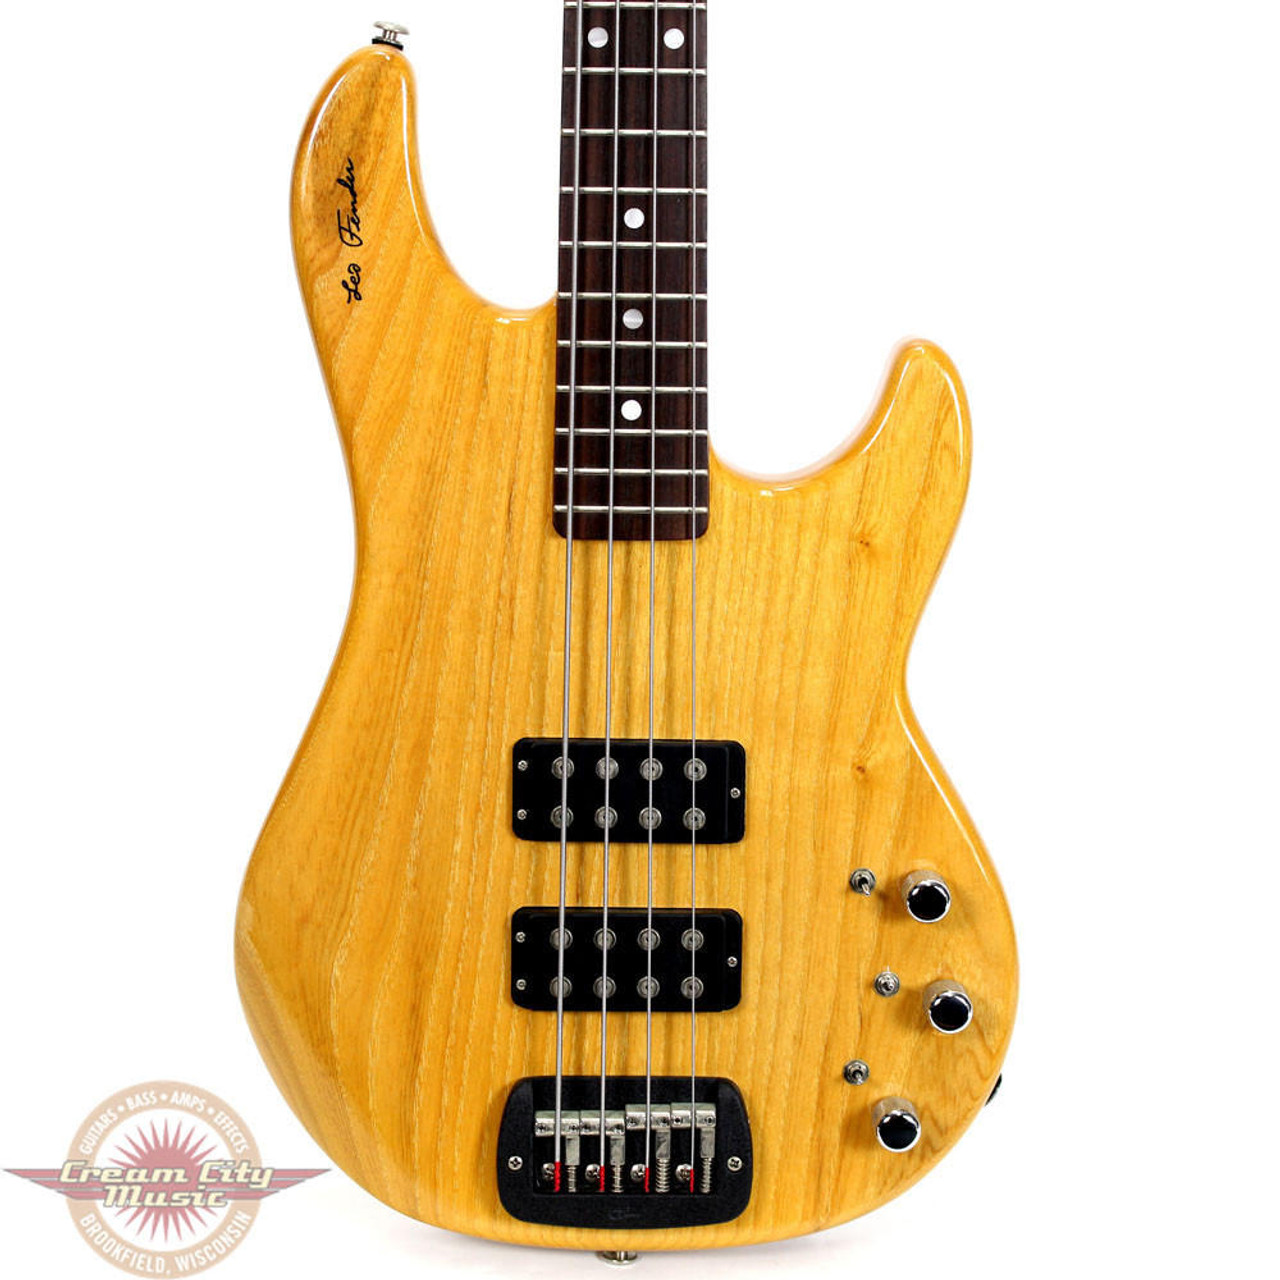 1992 G&L USA Made L-2000 Electric Bass Guitar in Natural Finish